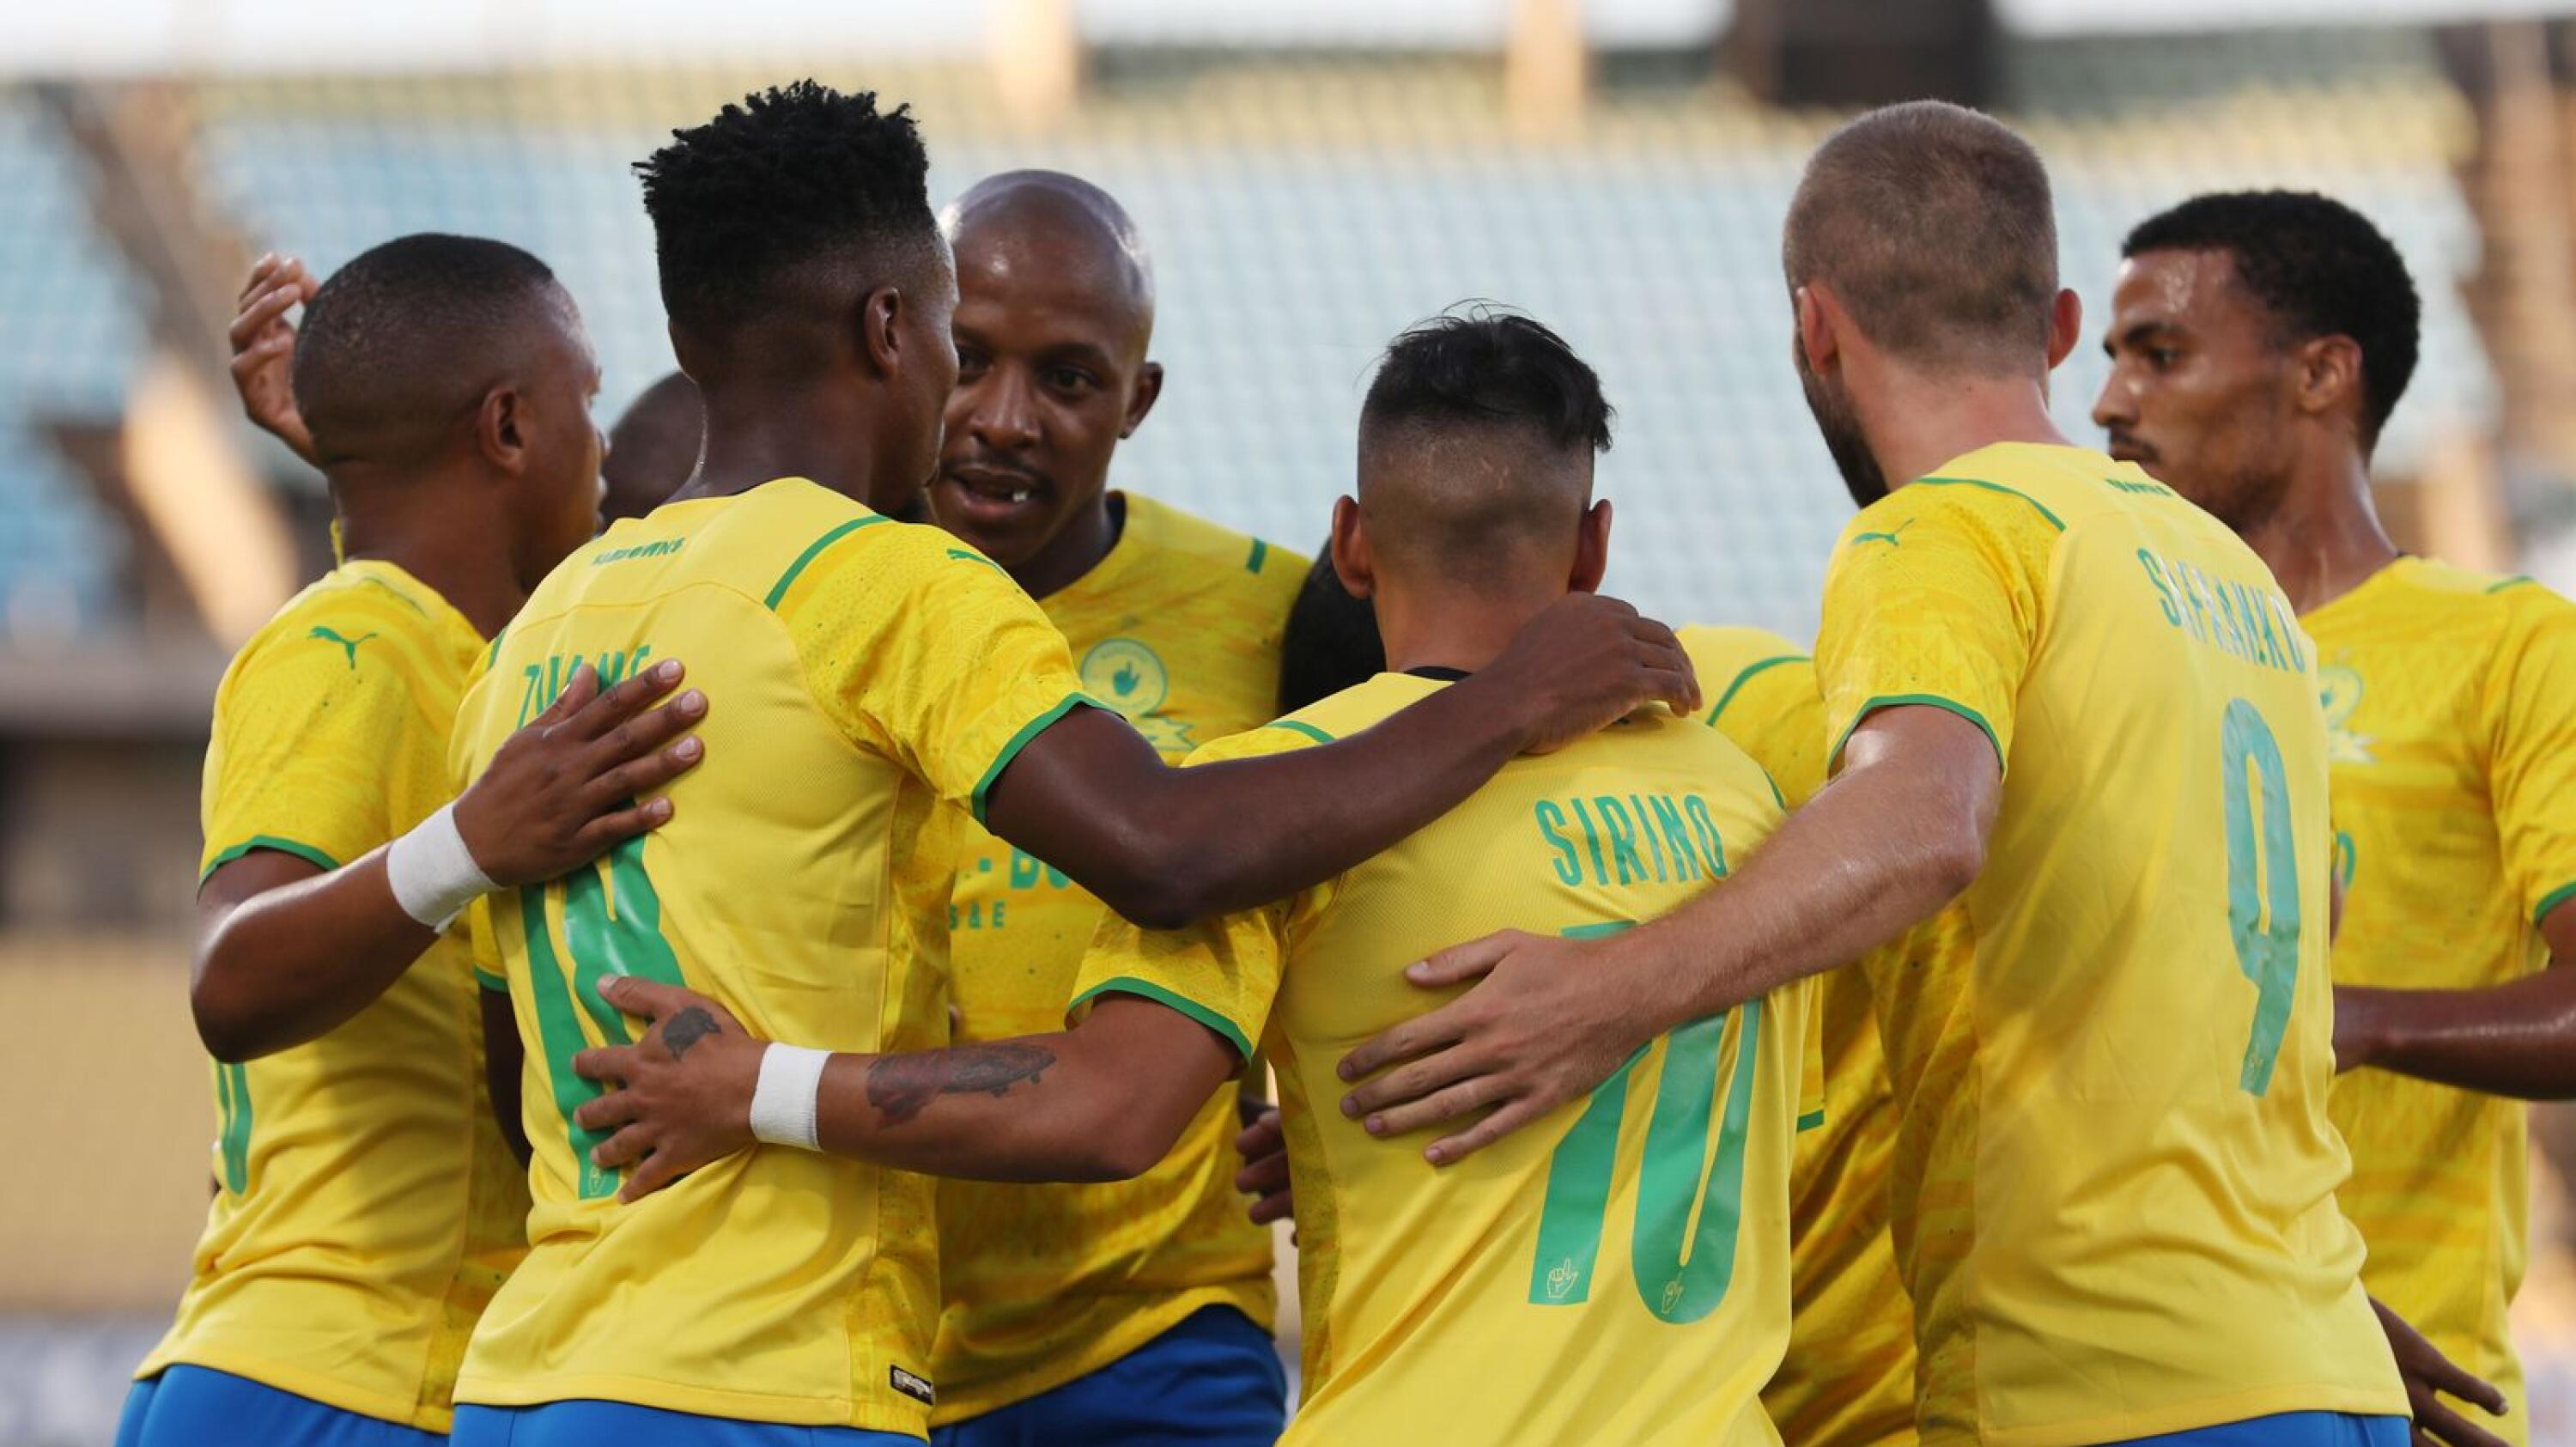 Themba Zwane of Mamelodi Sundowns celebrates with teammates after scoring during their CAF Champions League game against Al Hilal at Royal Bafokeng Stadium in Rustenburg on Friday